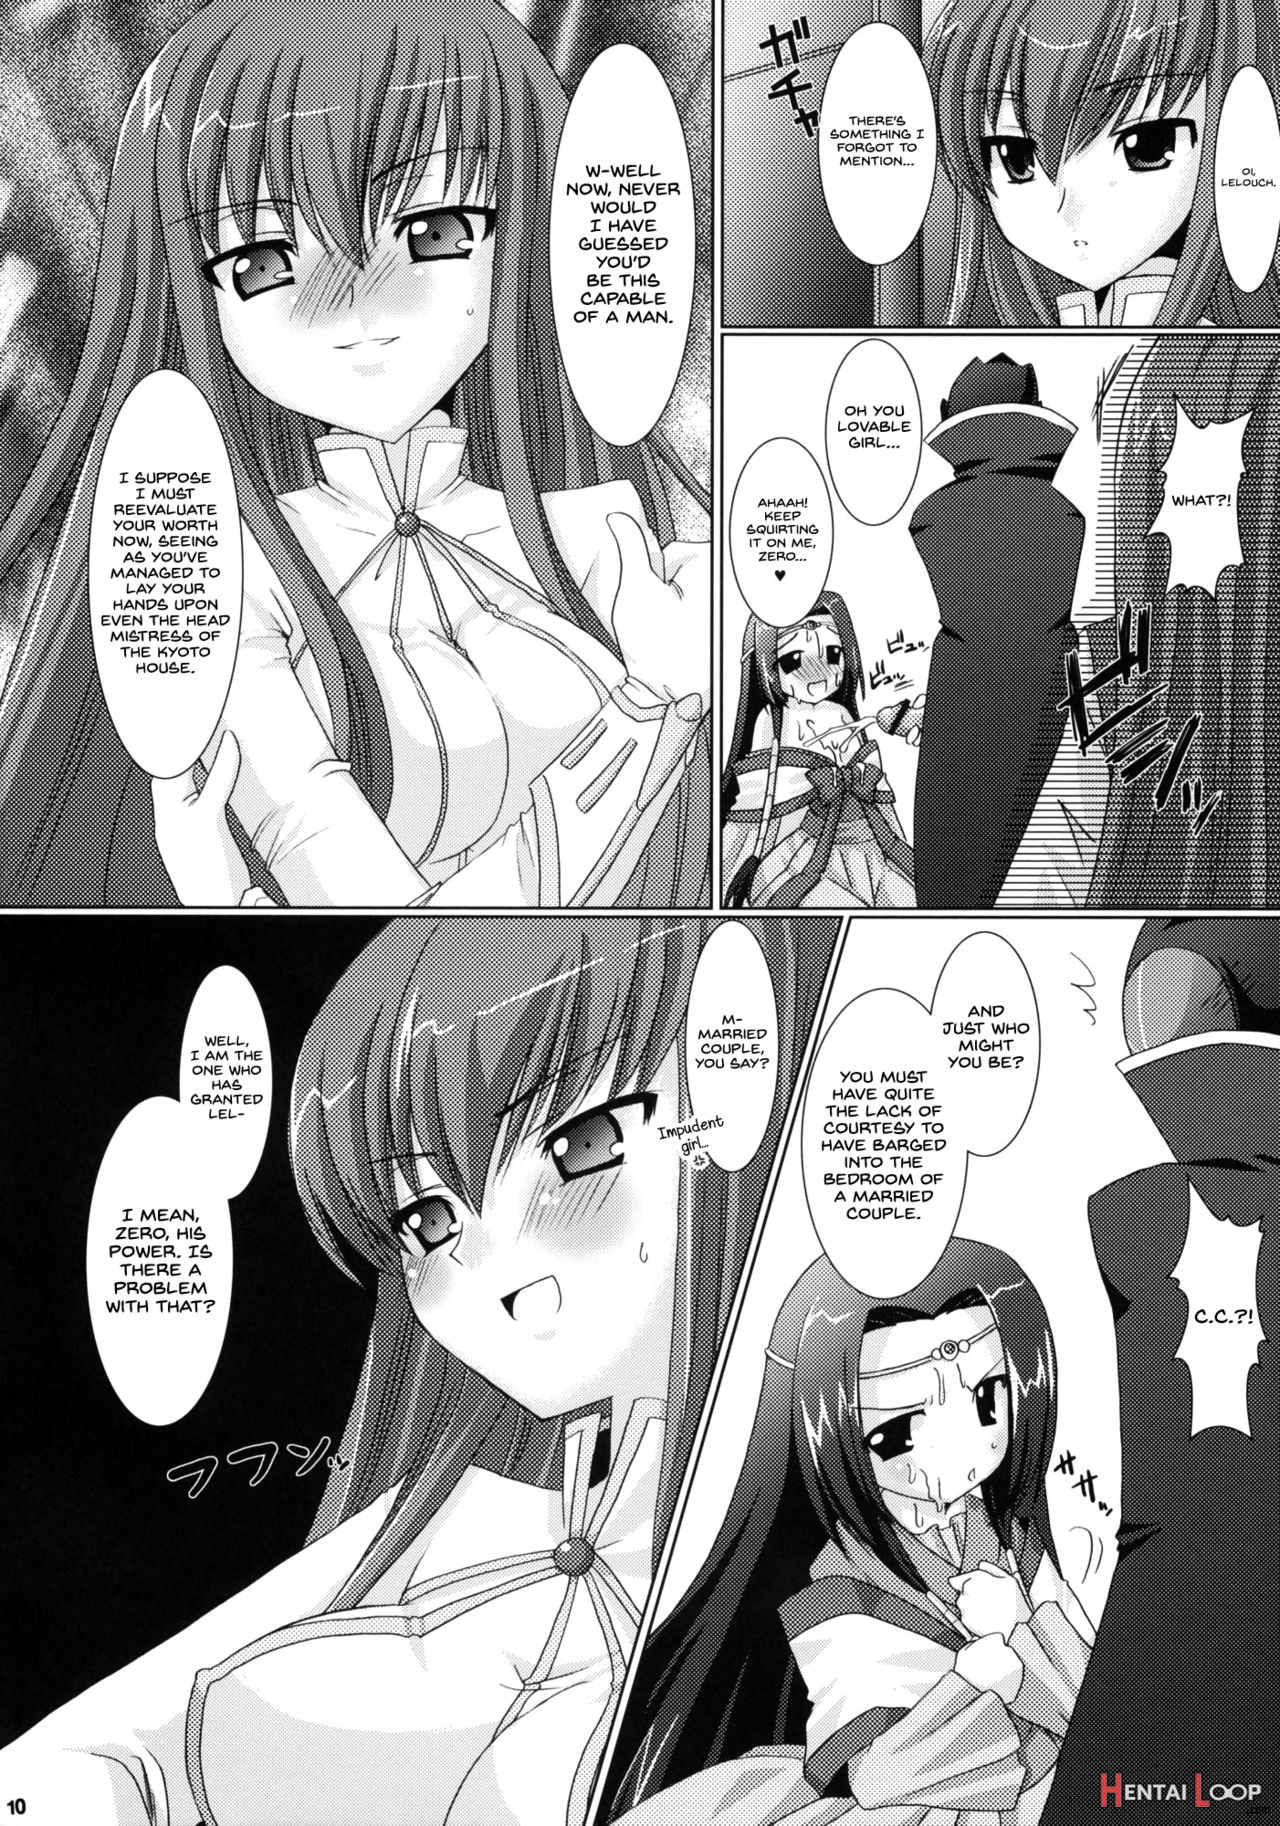 Kouhime Kyouhime page 10